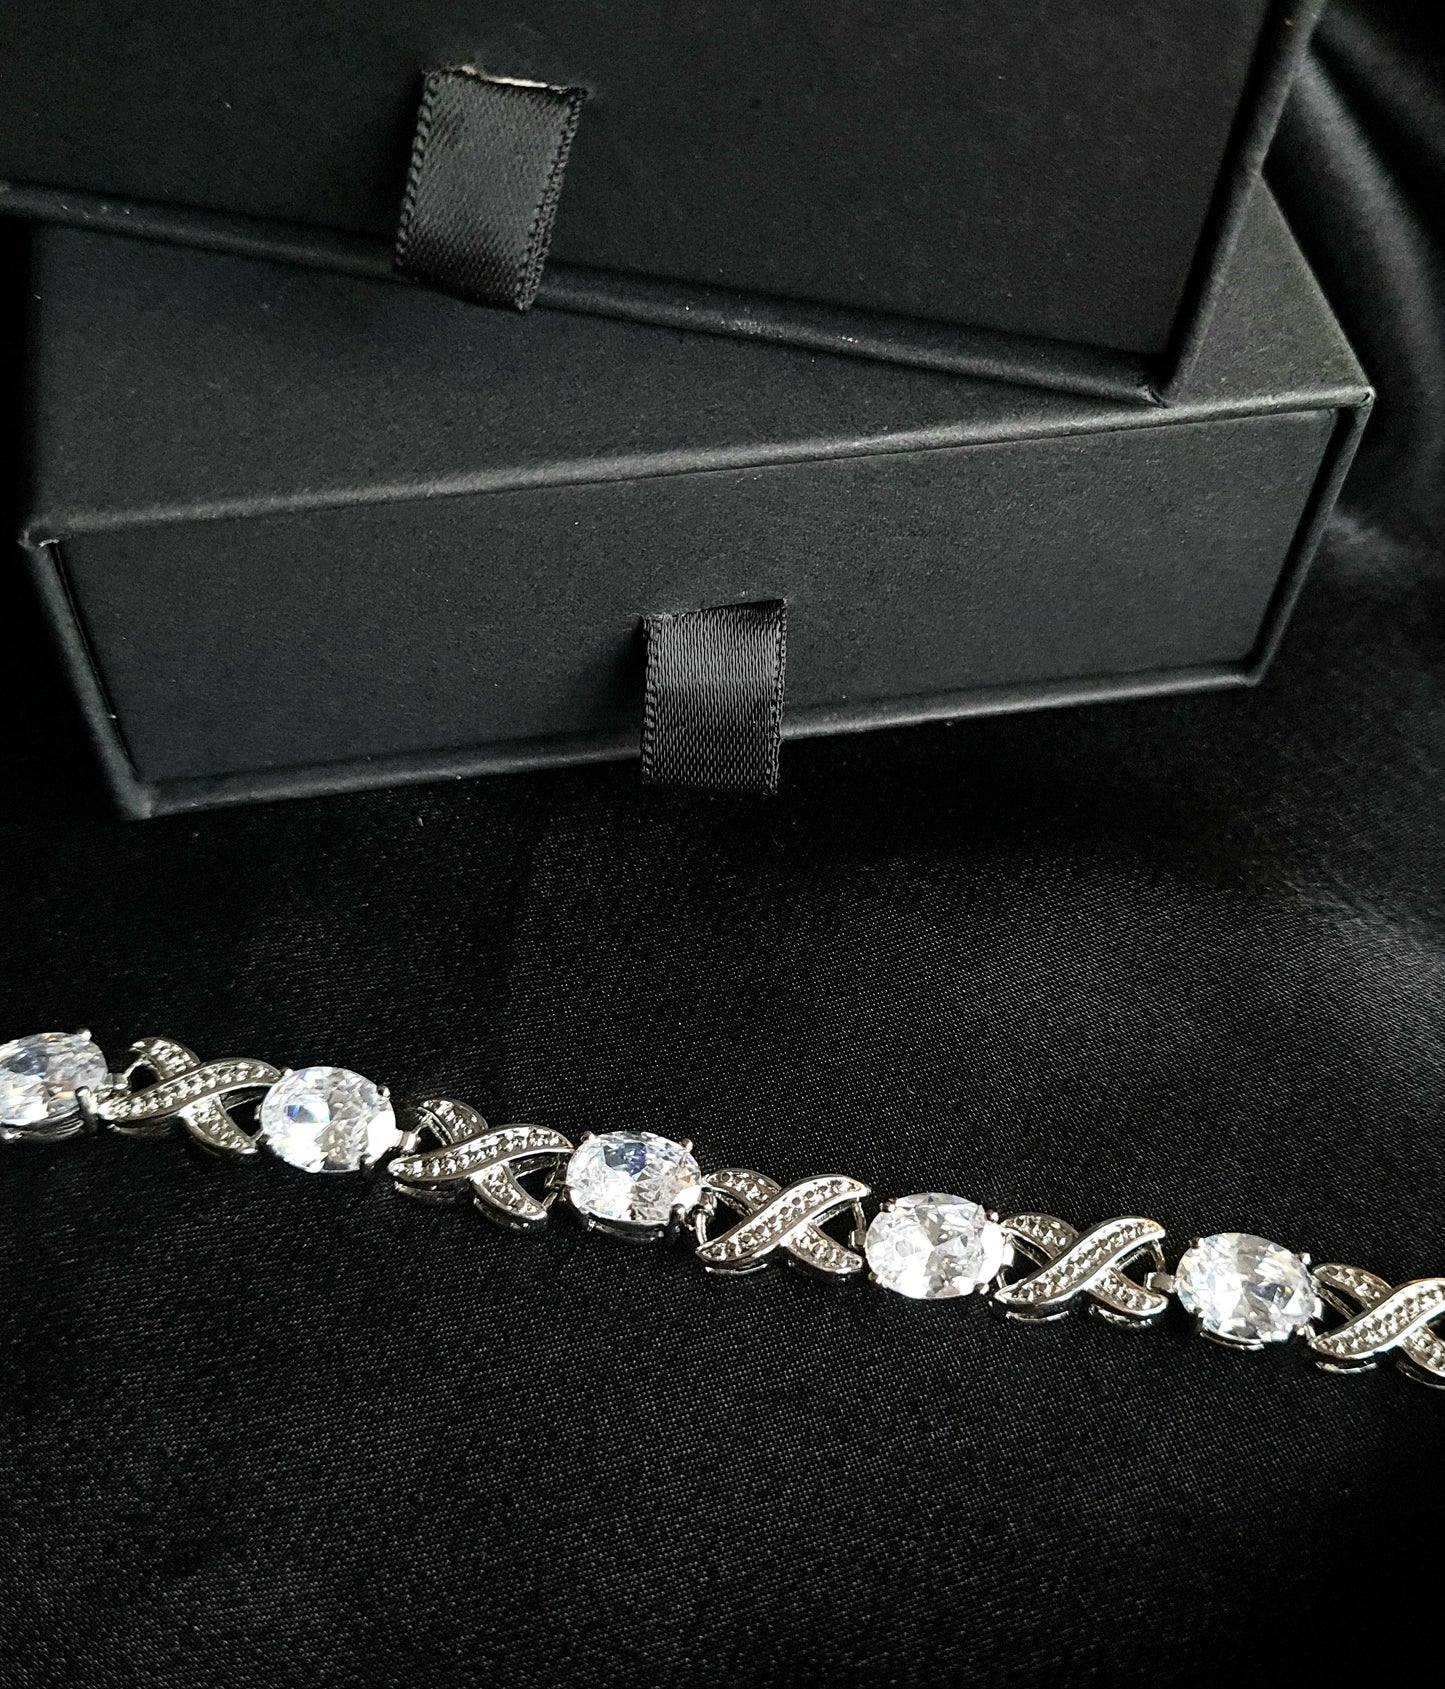 a close up look of a diamond bracelet  sparkling with Cubic Zirconia diamonds in a variety of shapes and sizes. displayed on a black fabric.